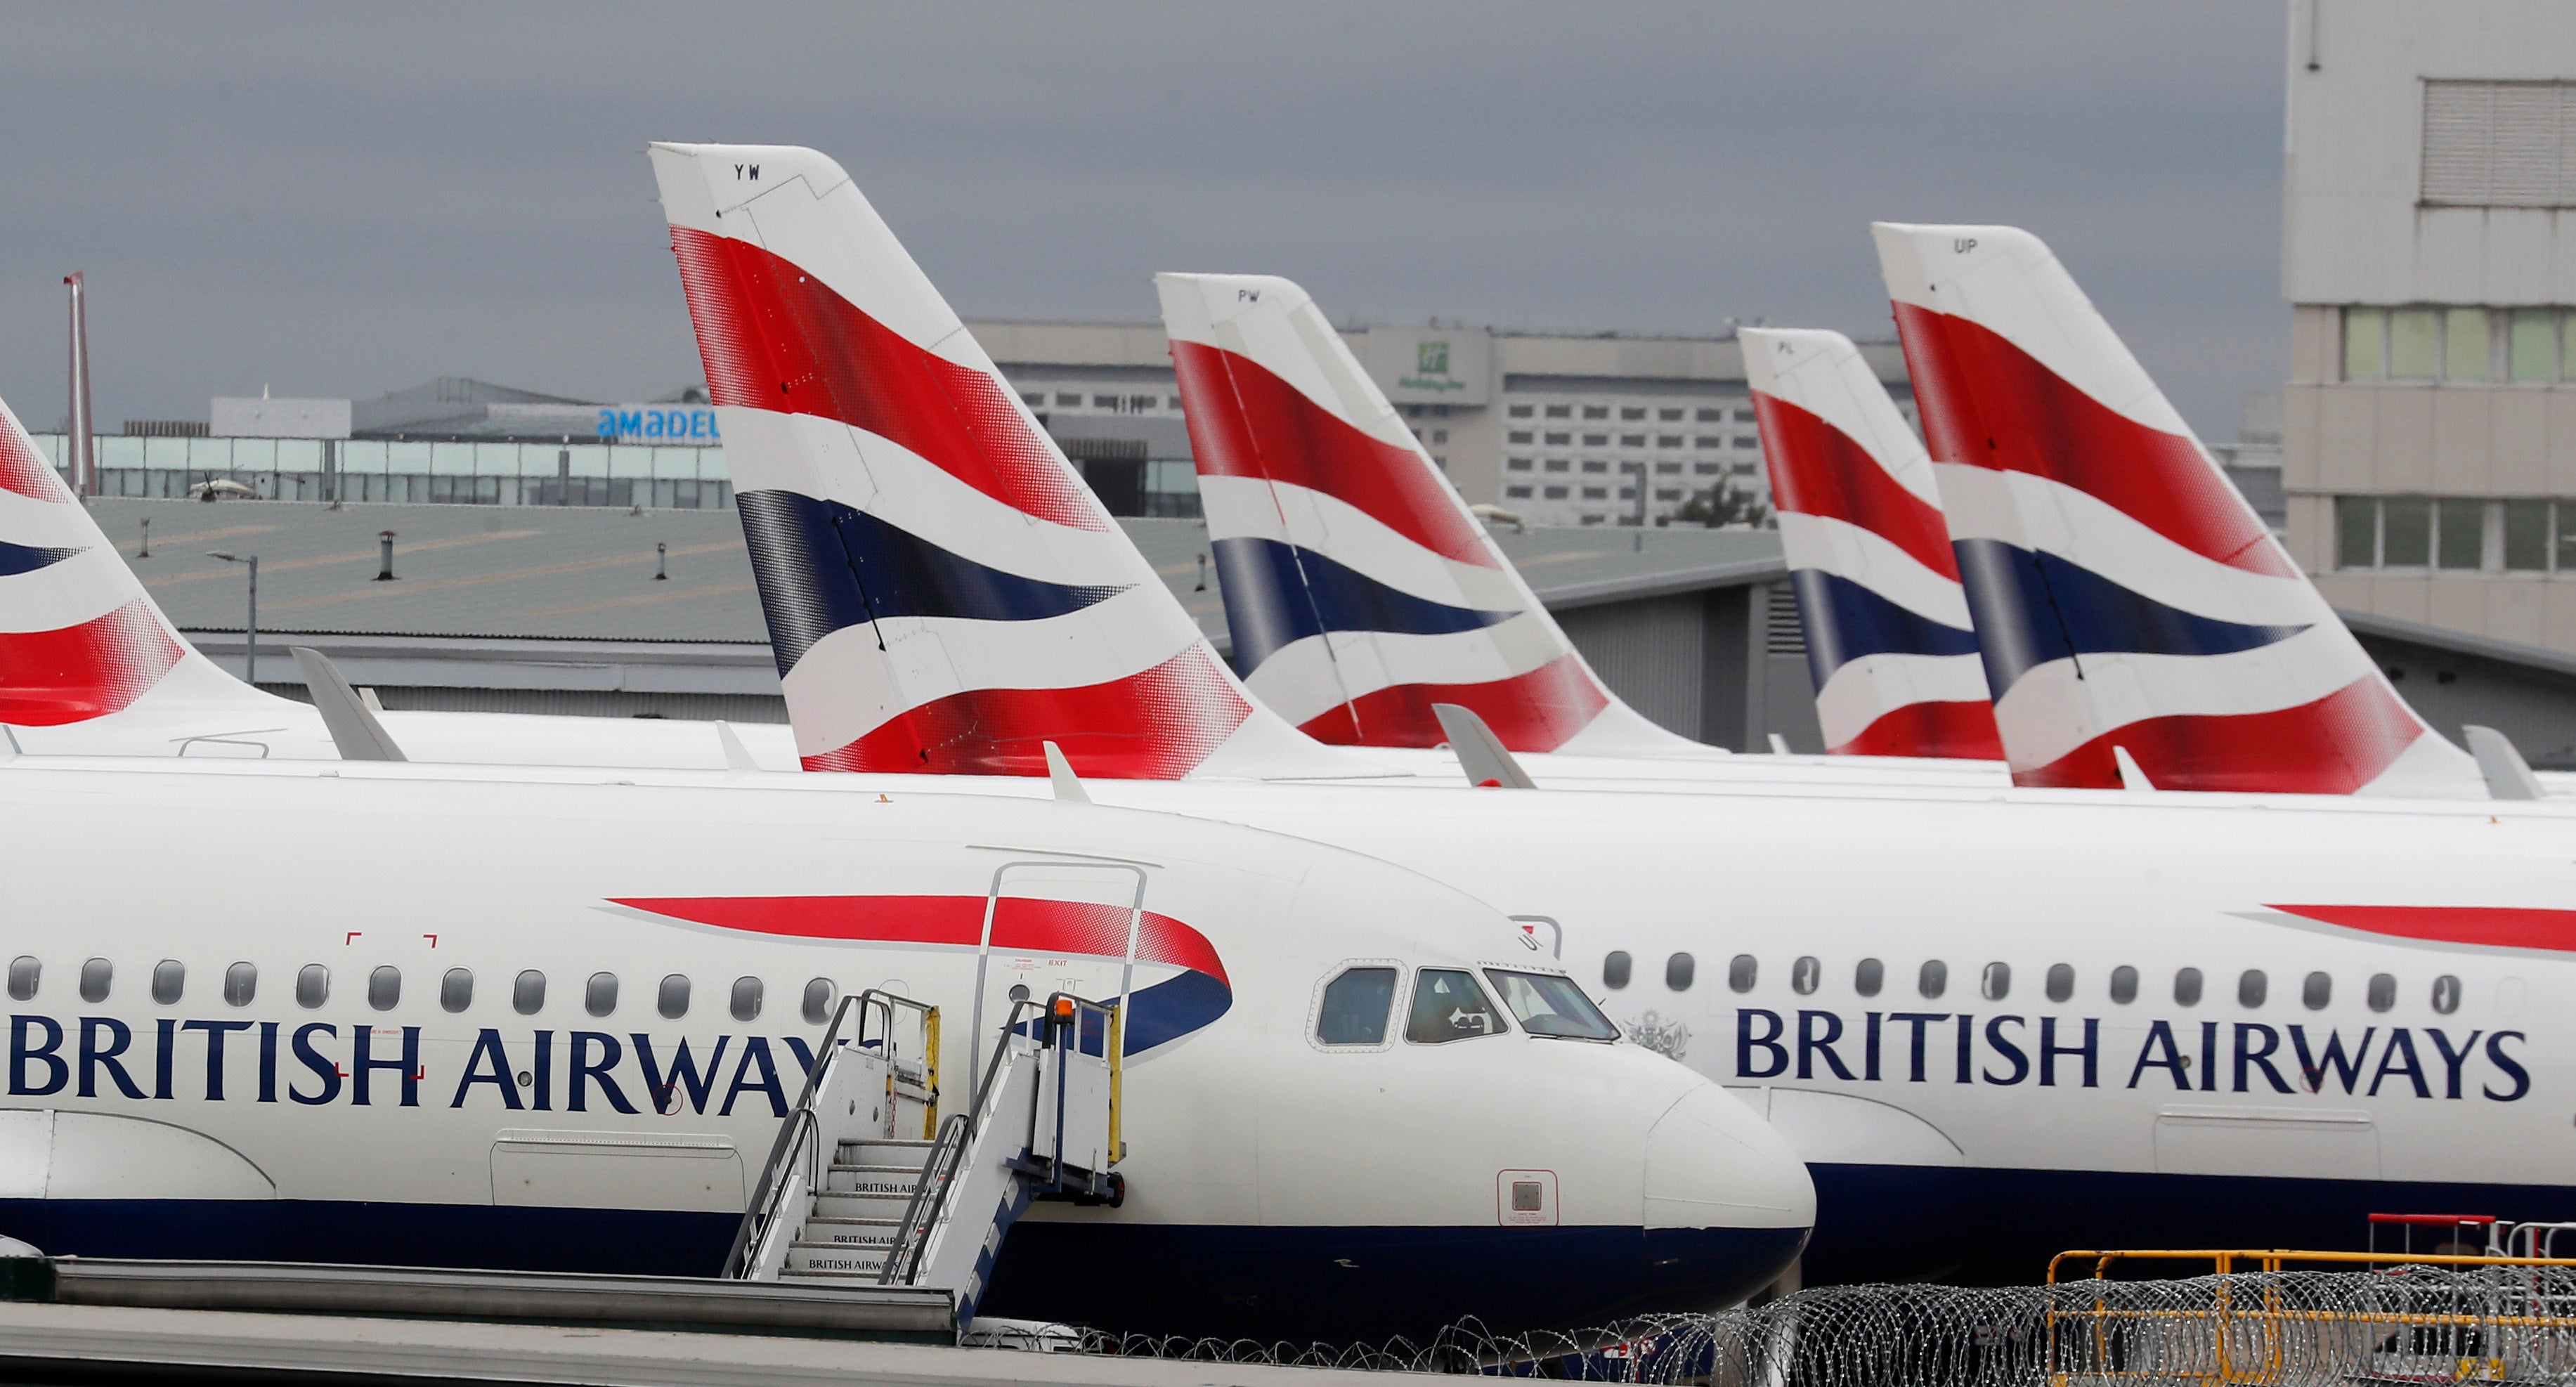 British Airways says the aircraft had ‘landed safely’ in Athens [file photo]